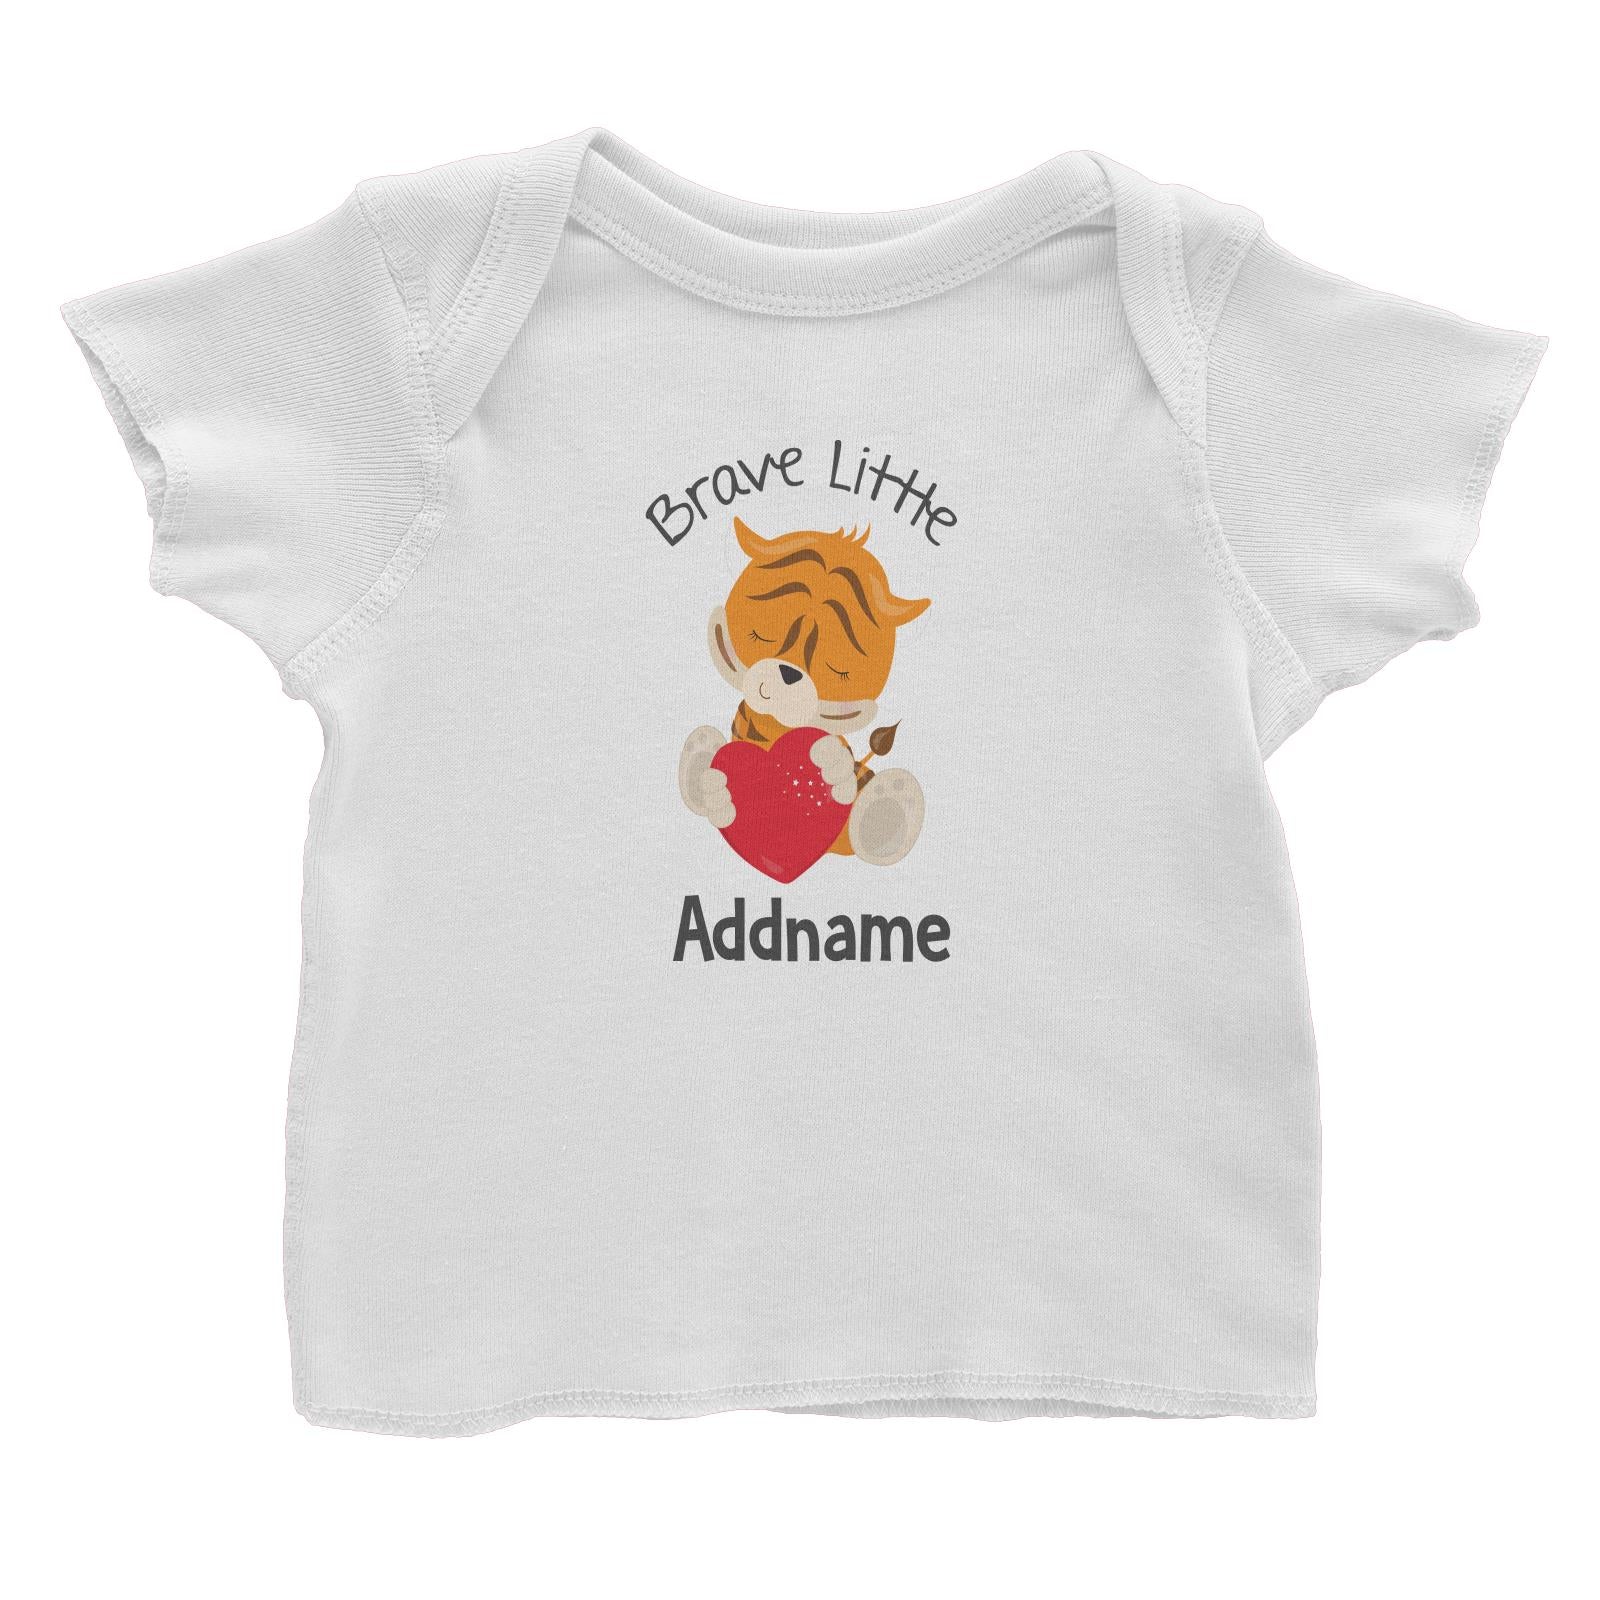 Animal Hearts Brave Little Tiger Addname Baby T-Shirt